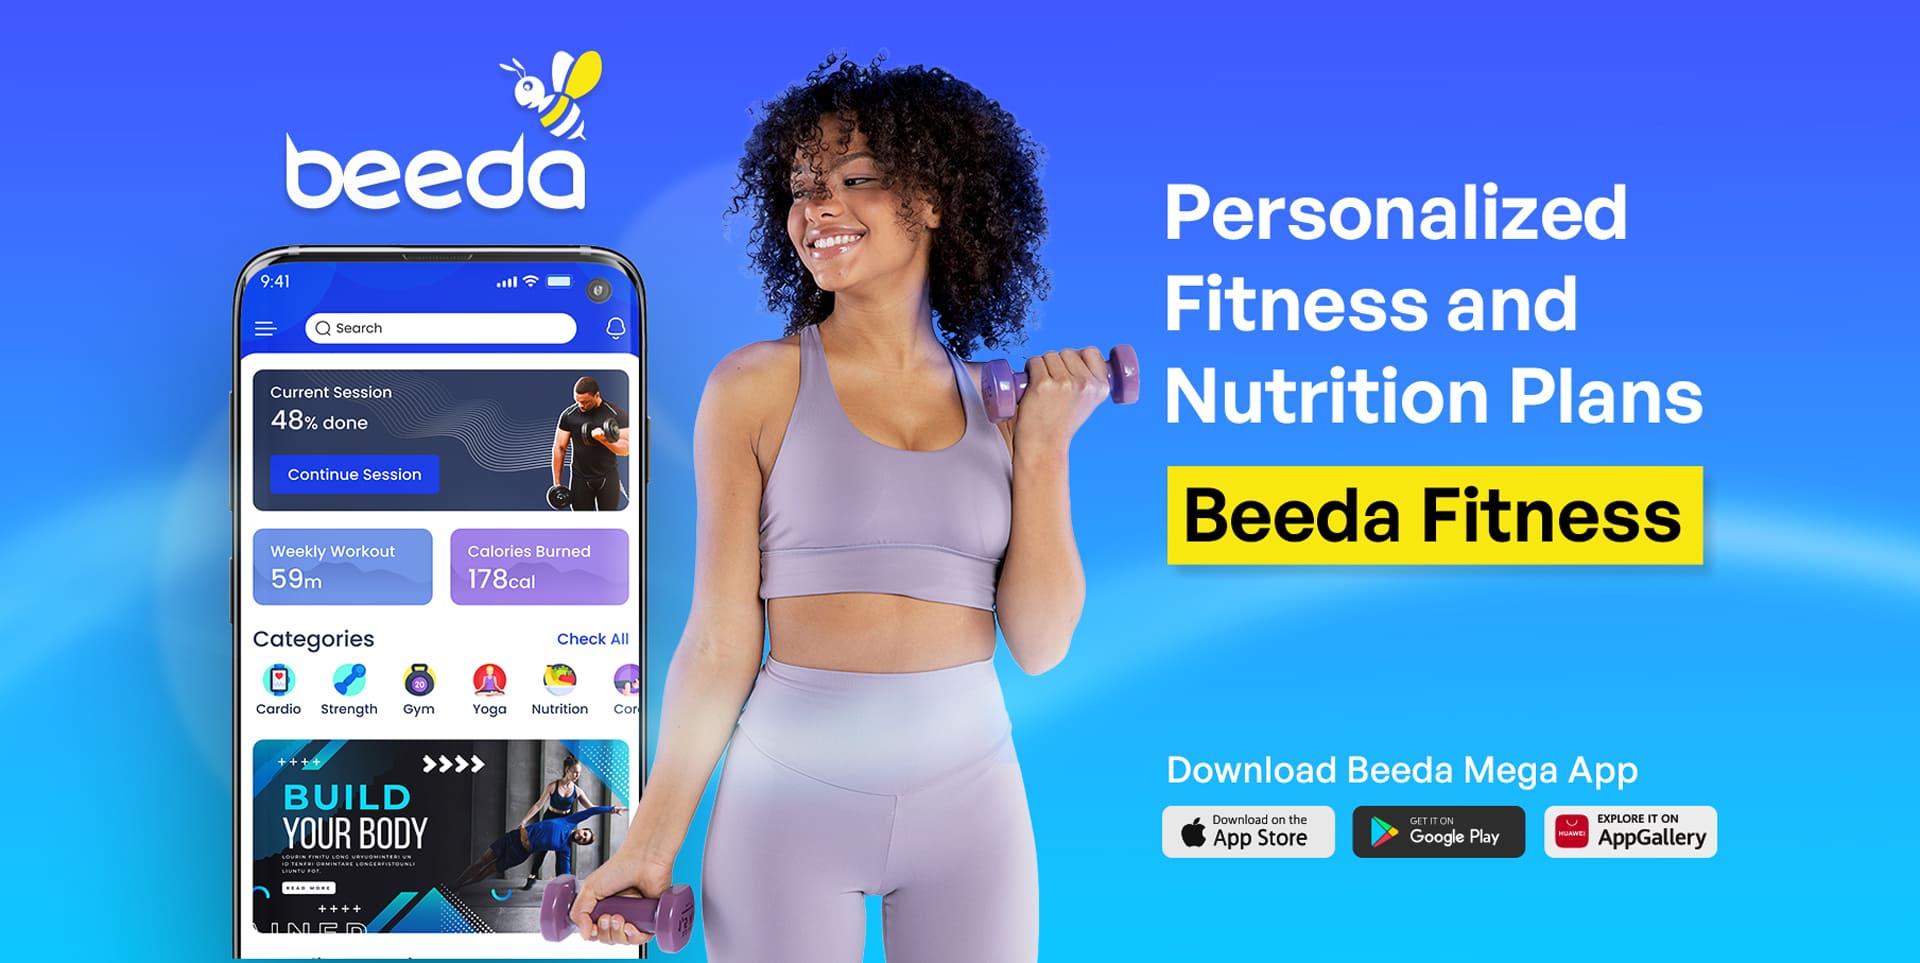 Personalized Fitness & Nutrition Plans: Beeda Fitness